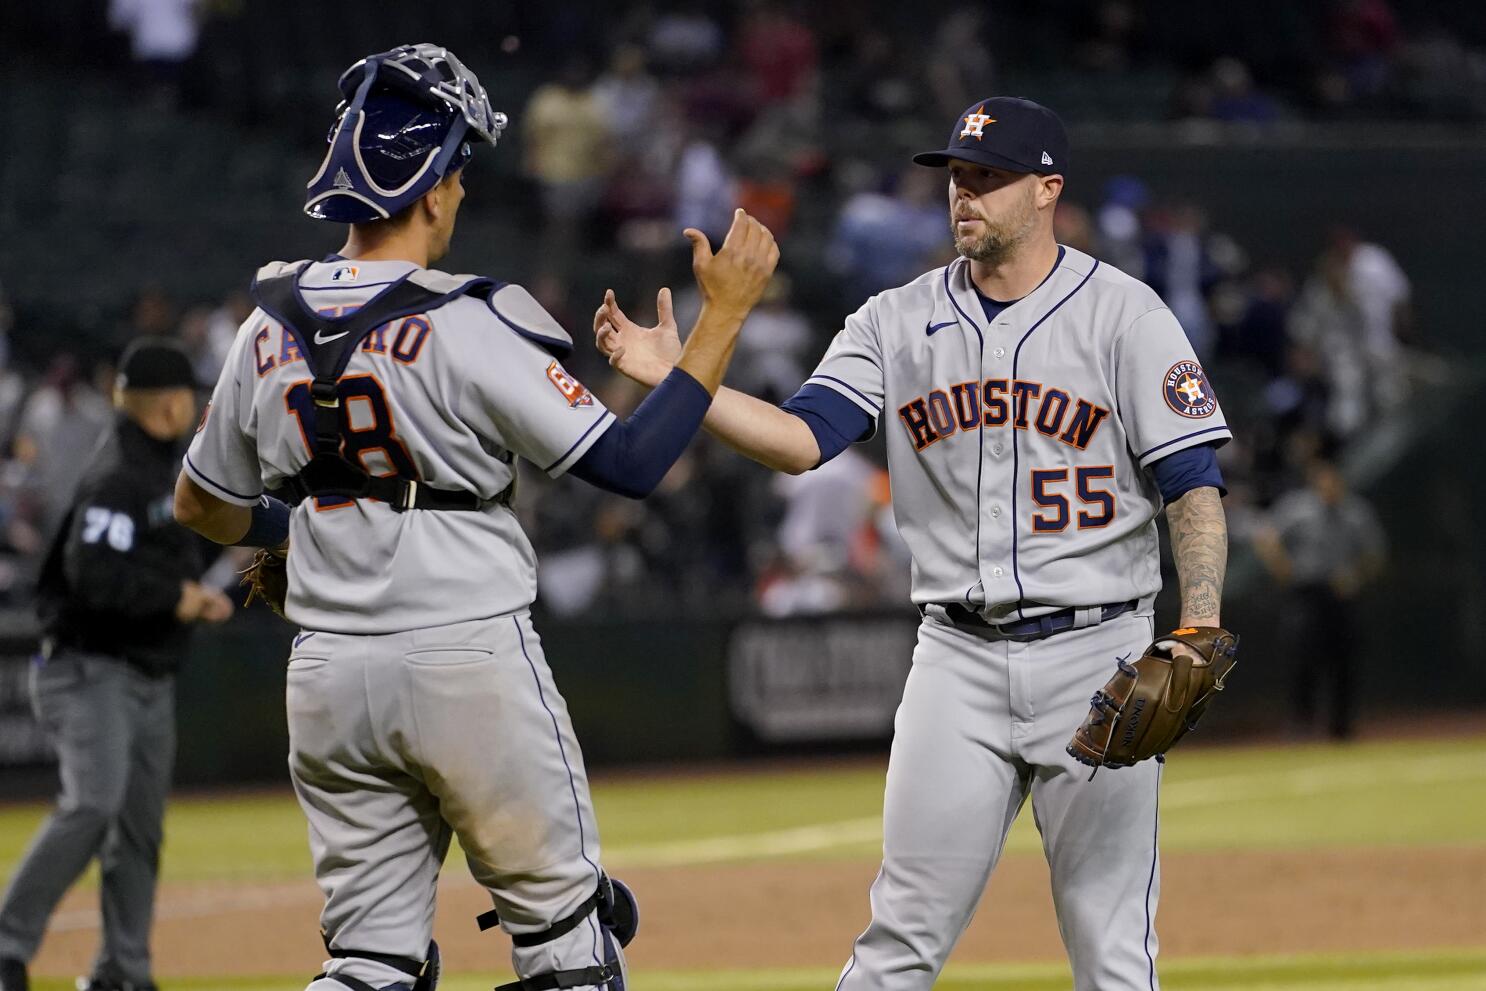 Houston Astros: The All-Star Game hit drought continues through 2017